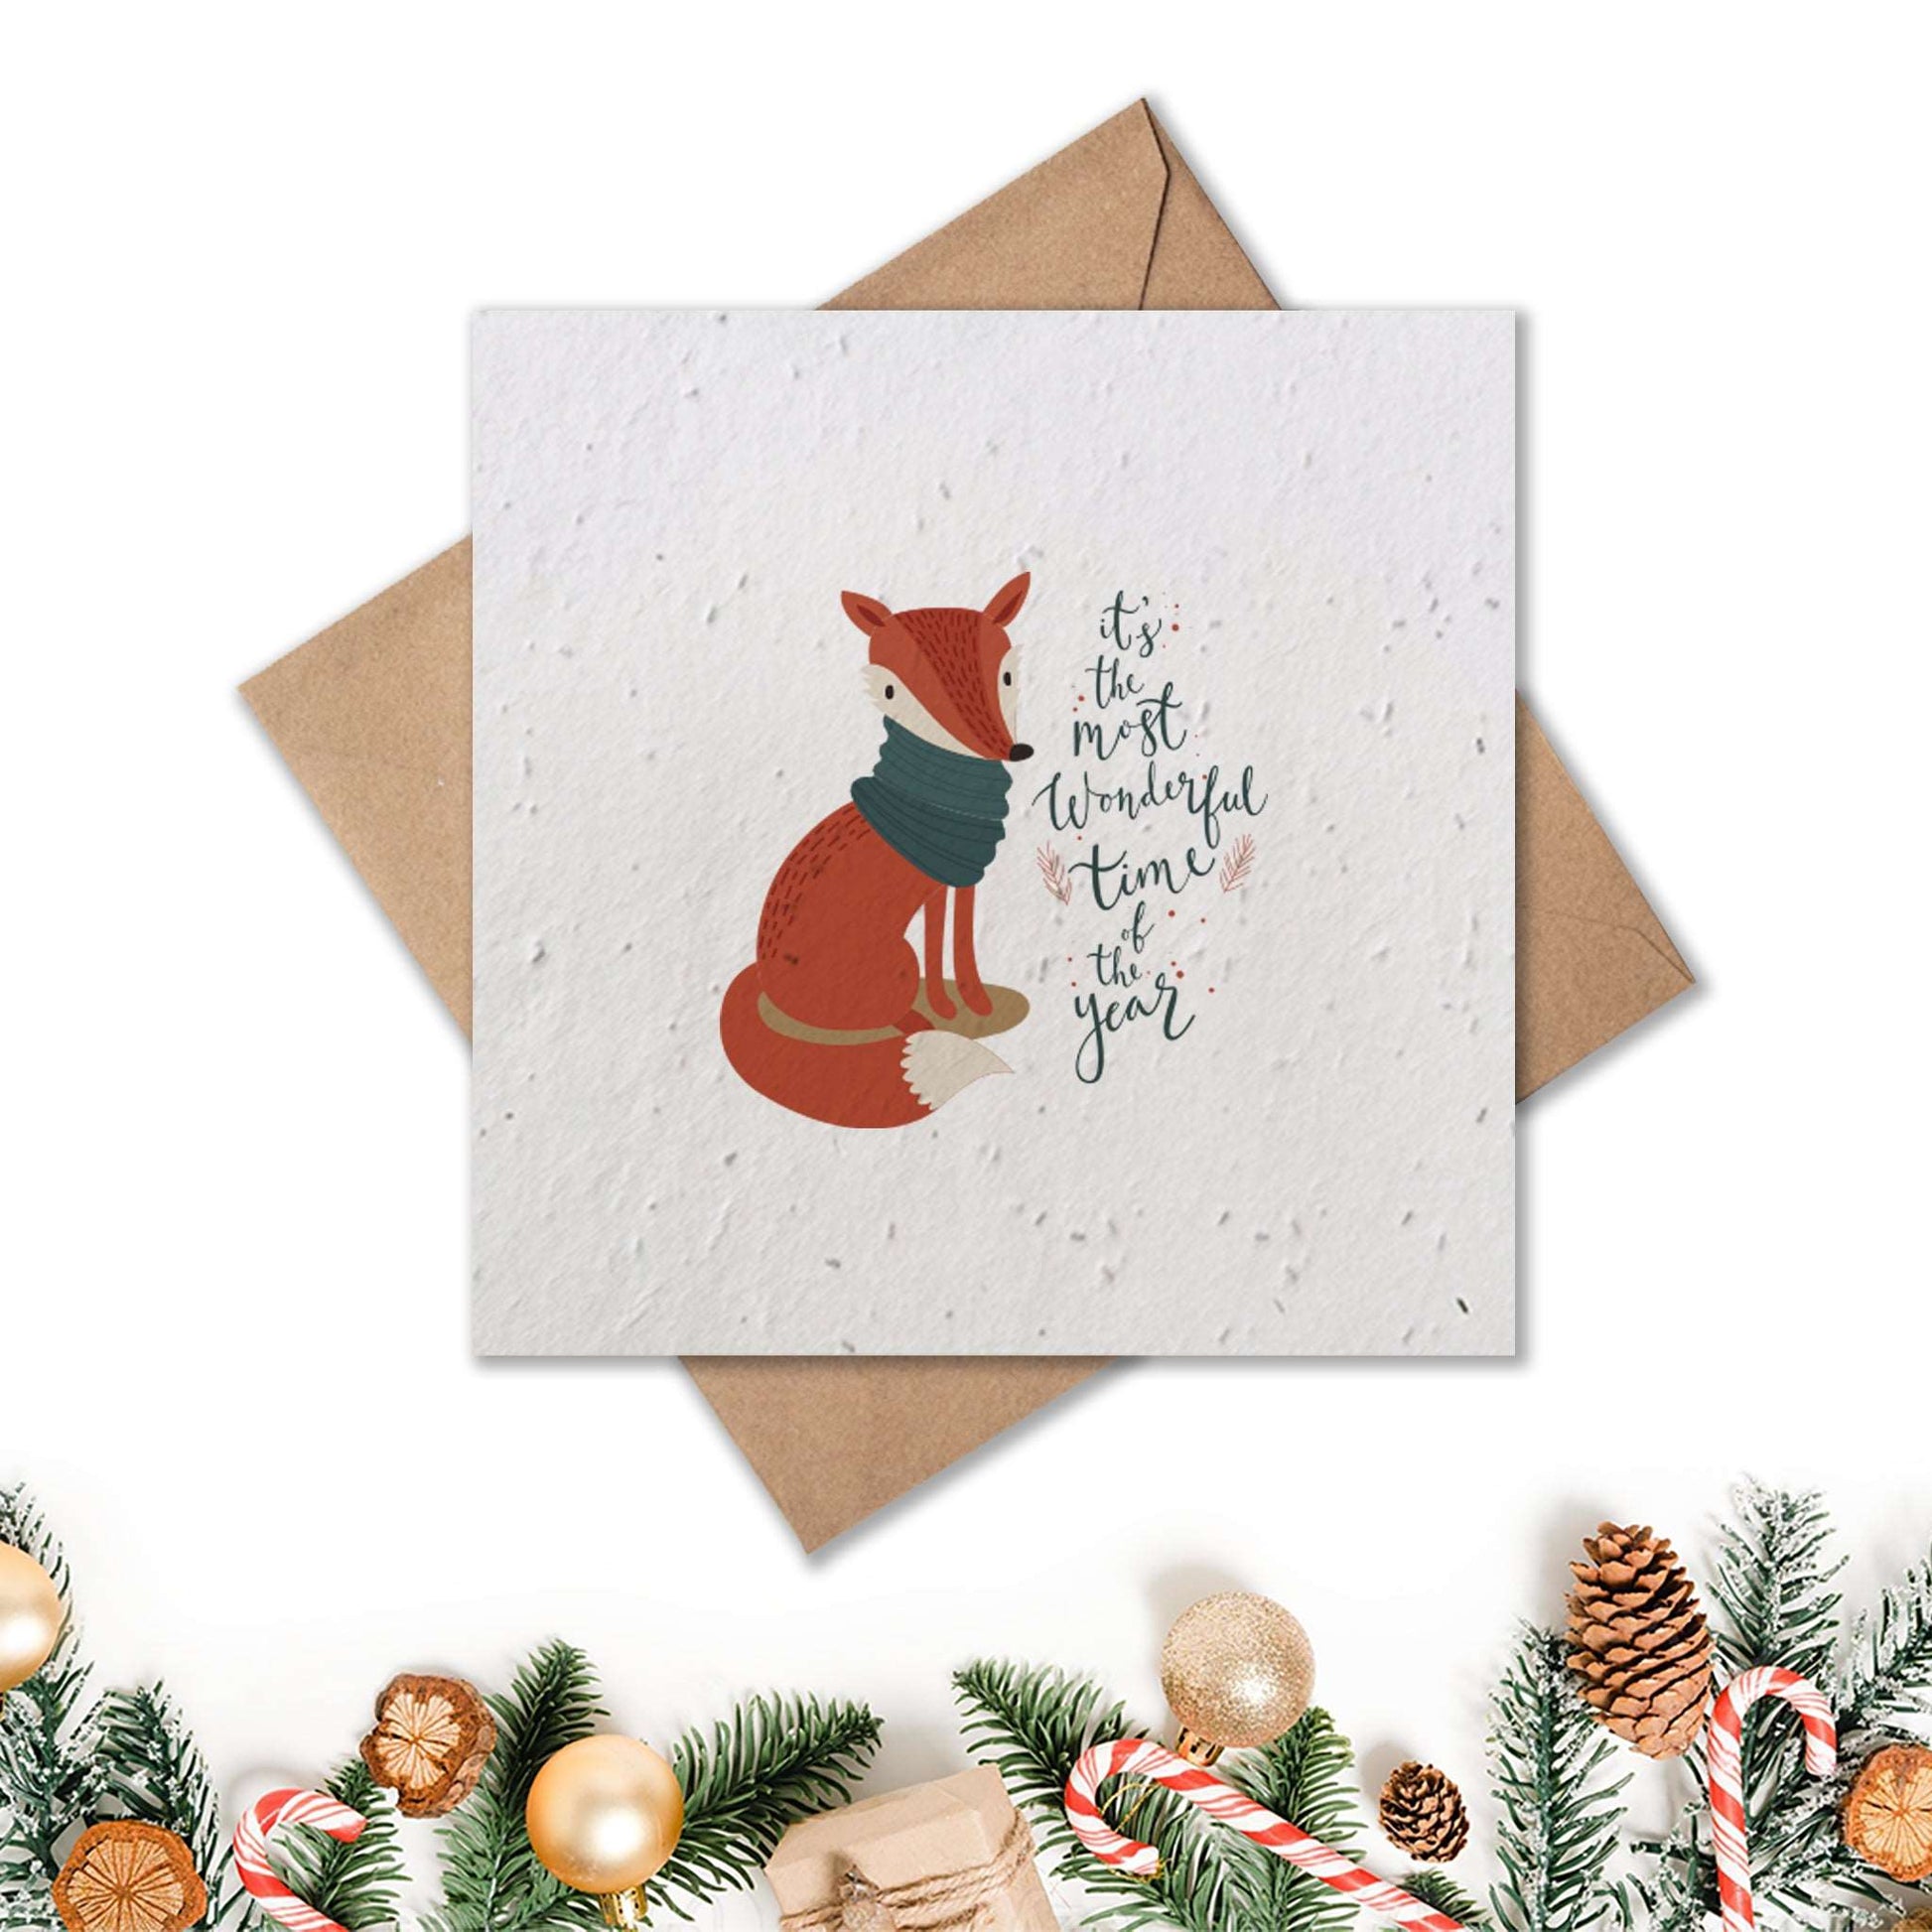 Plantable Seed Paper Christmas Card - Wonderful Fox Greeting Card Little Green Paper Shop